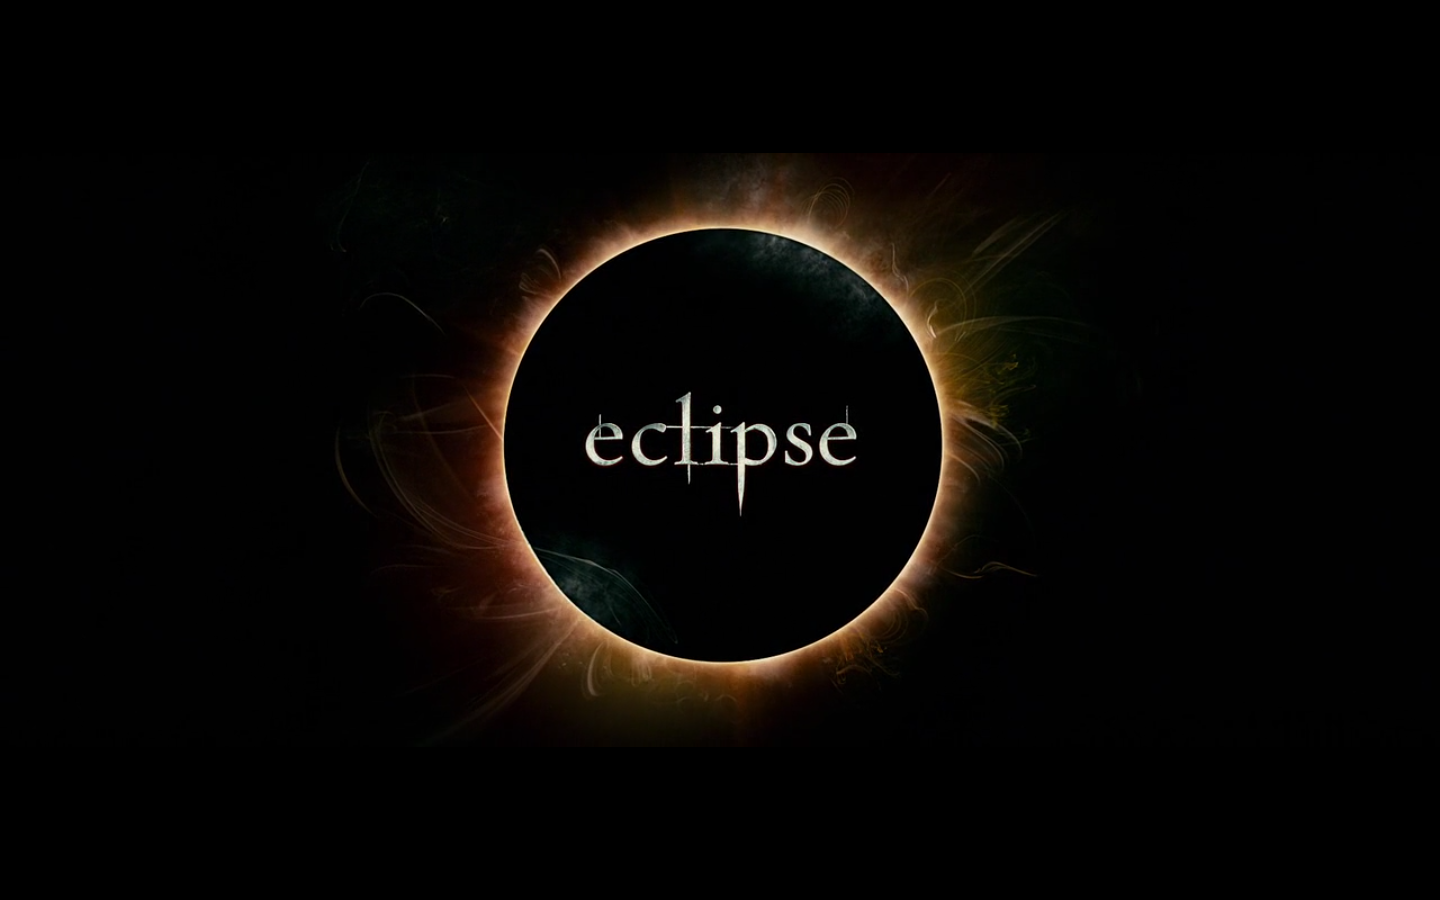 Twilight eclipse free streaming